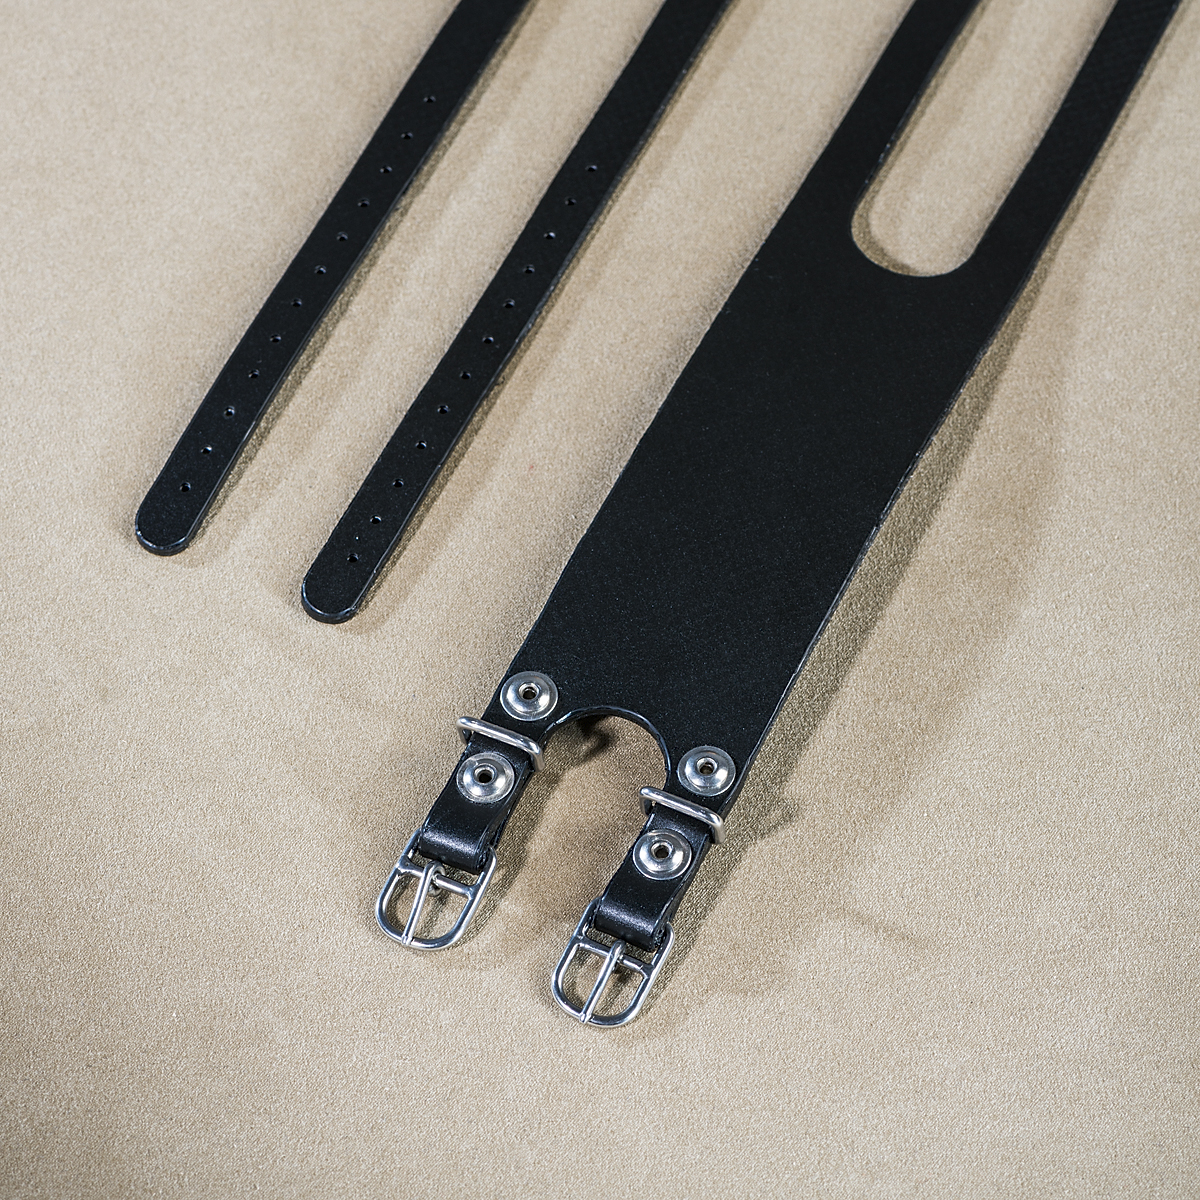 PVC straps for fixed gear 3.